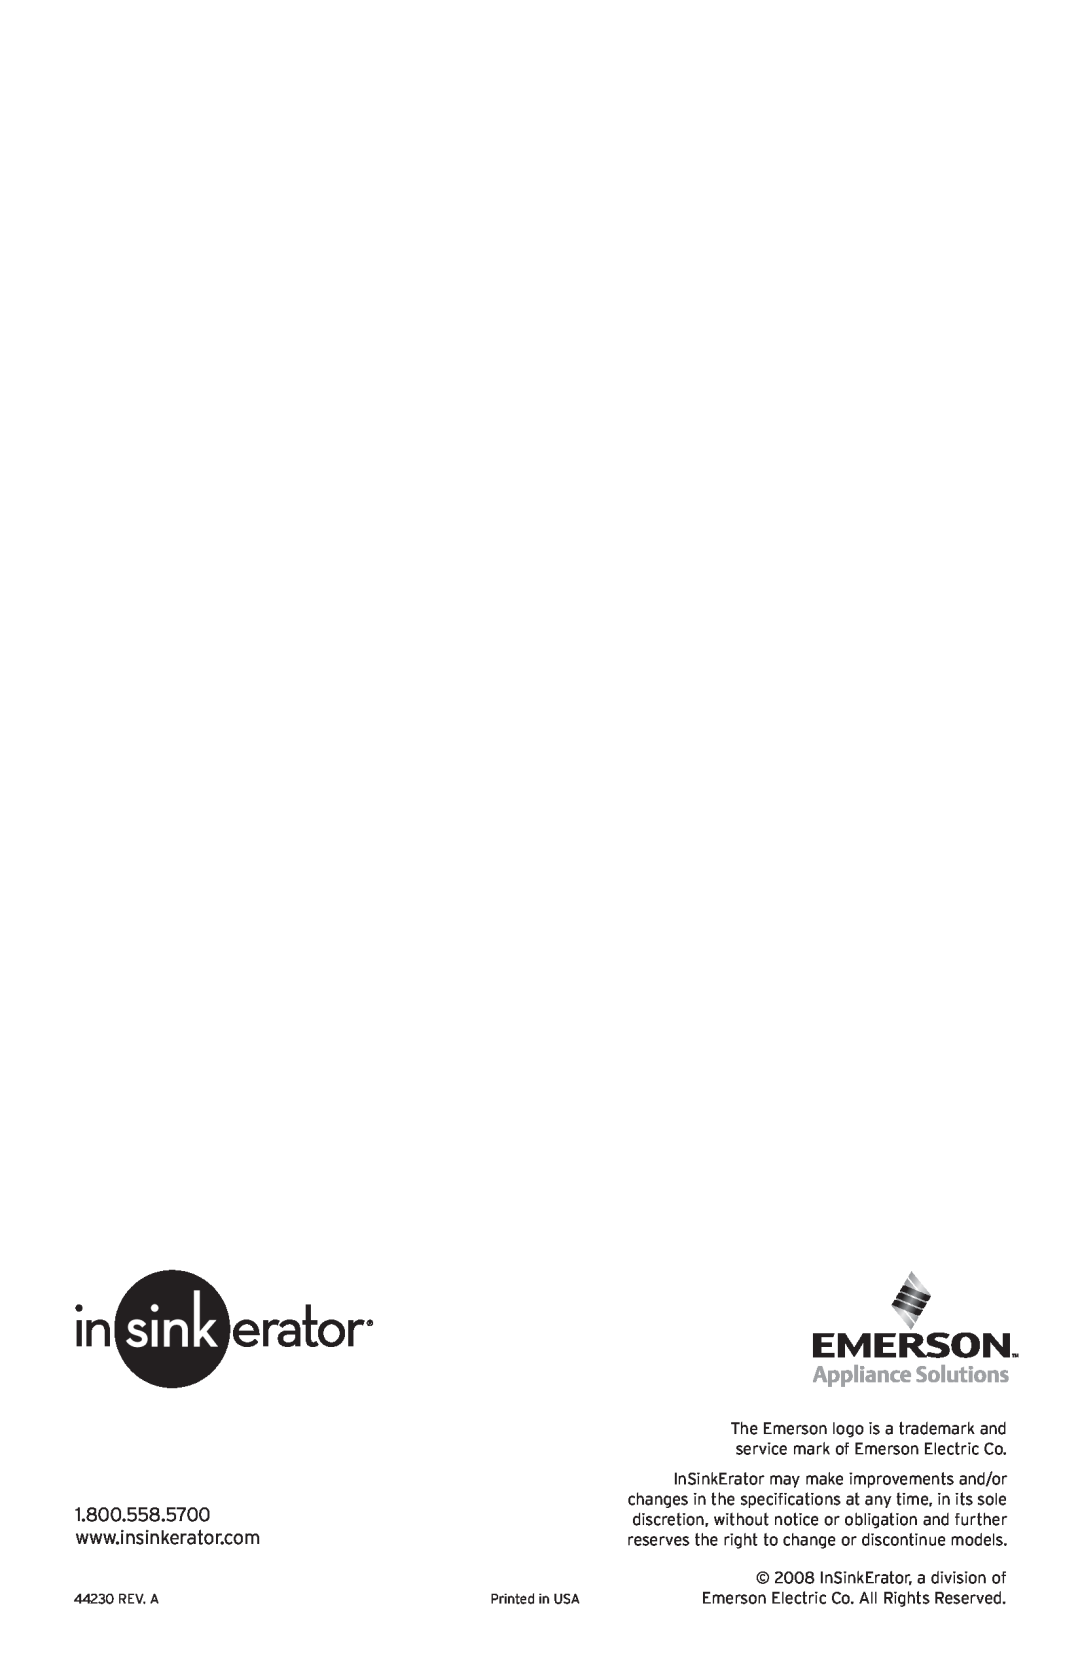 Emerson UWL The Emerson logo is a trademark and, service mark of Emerson Electric Co, InSinkErator, a division of 